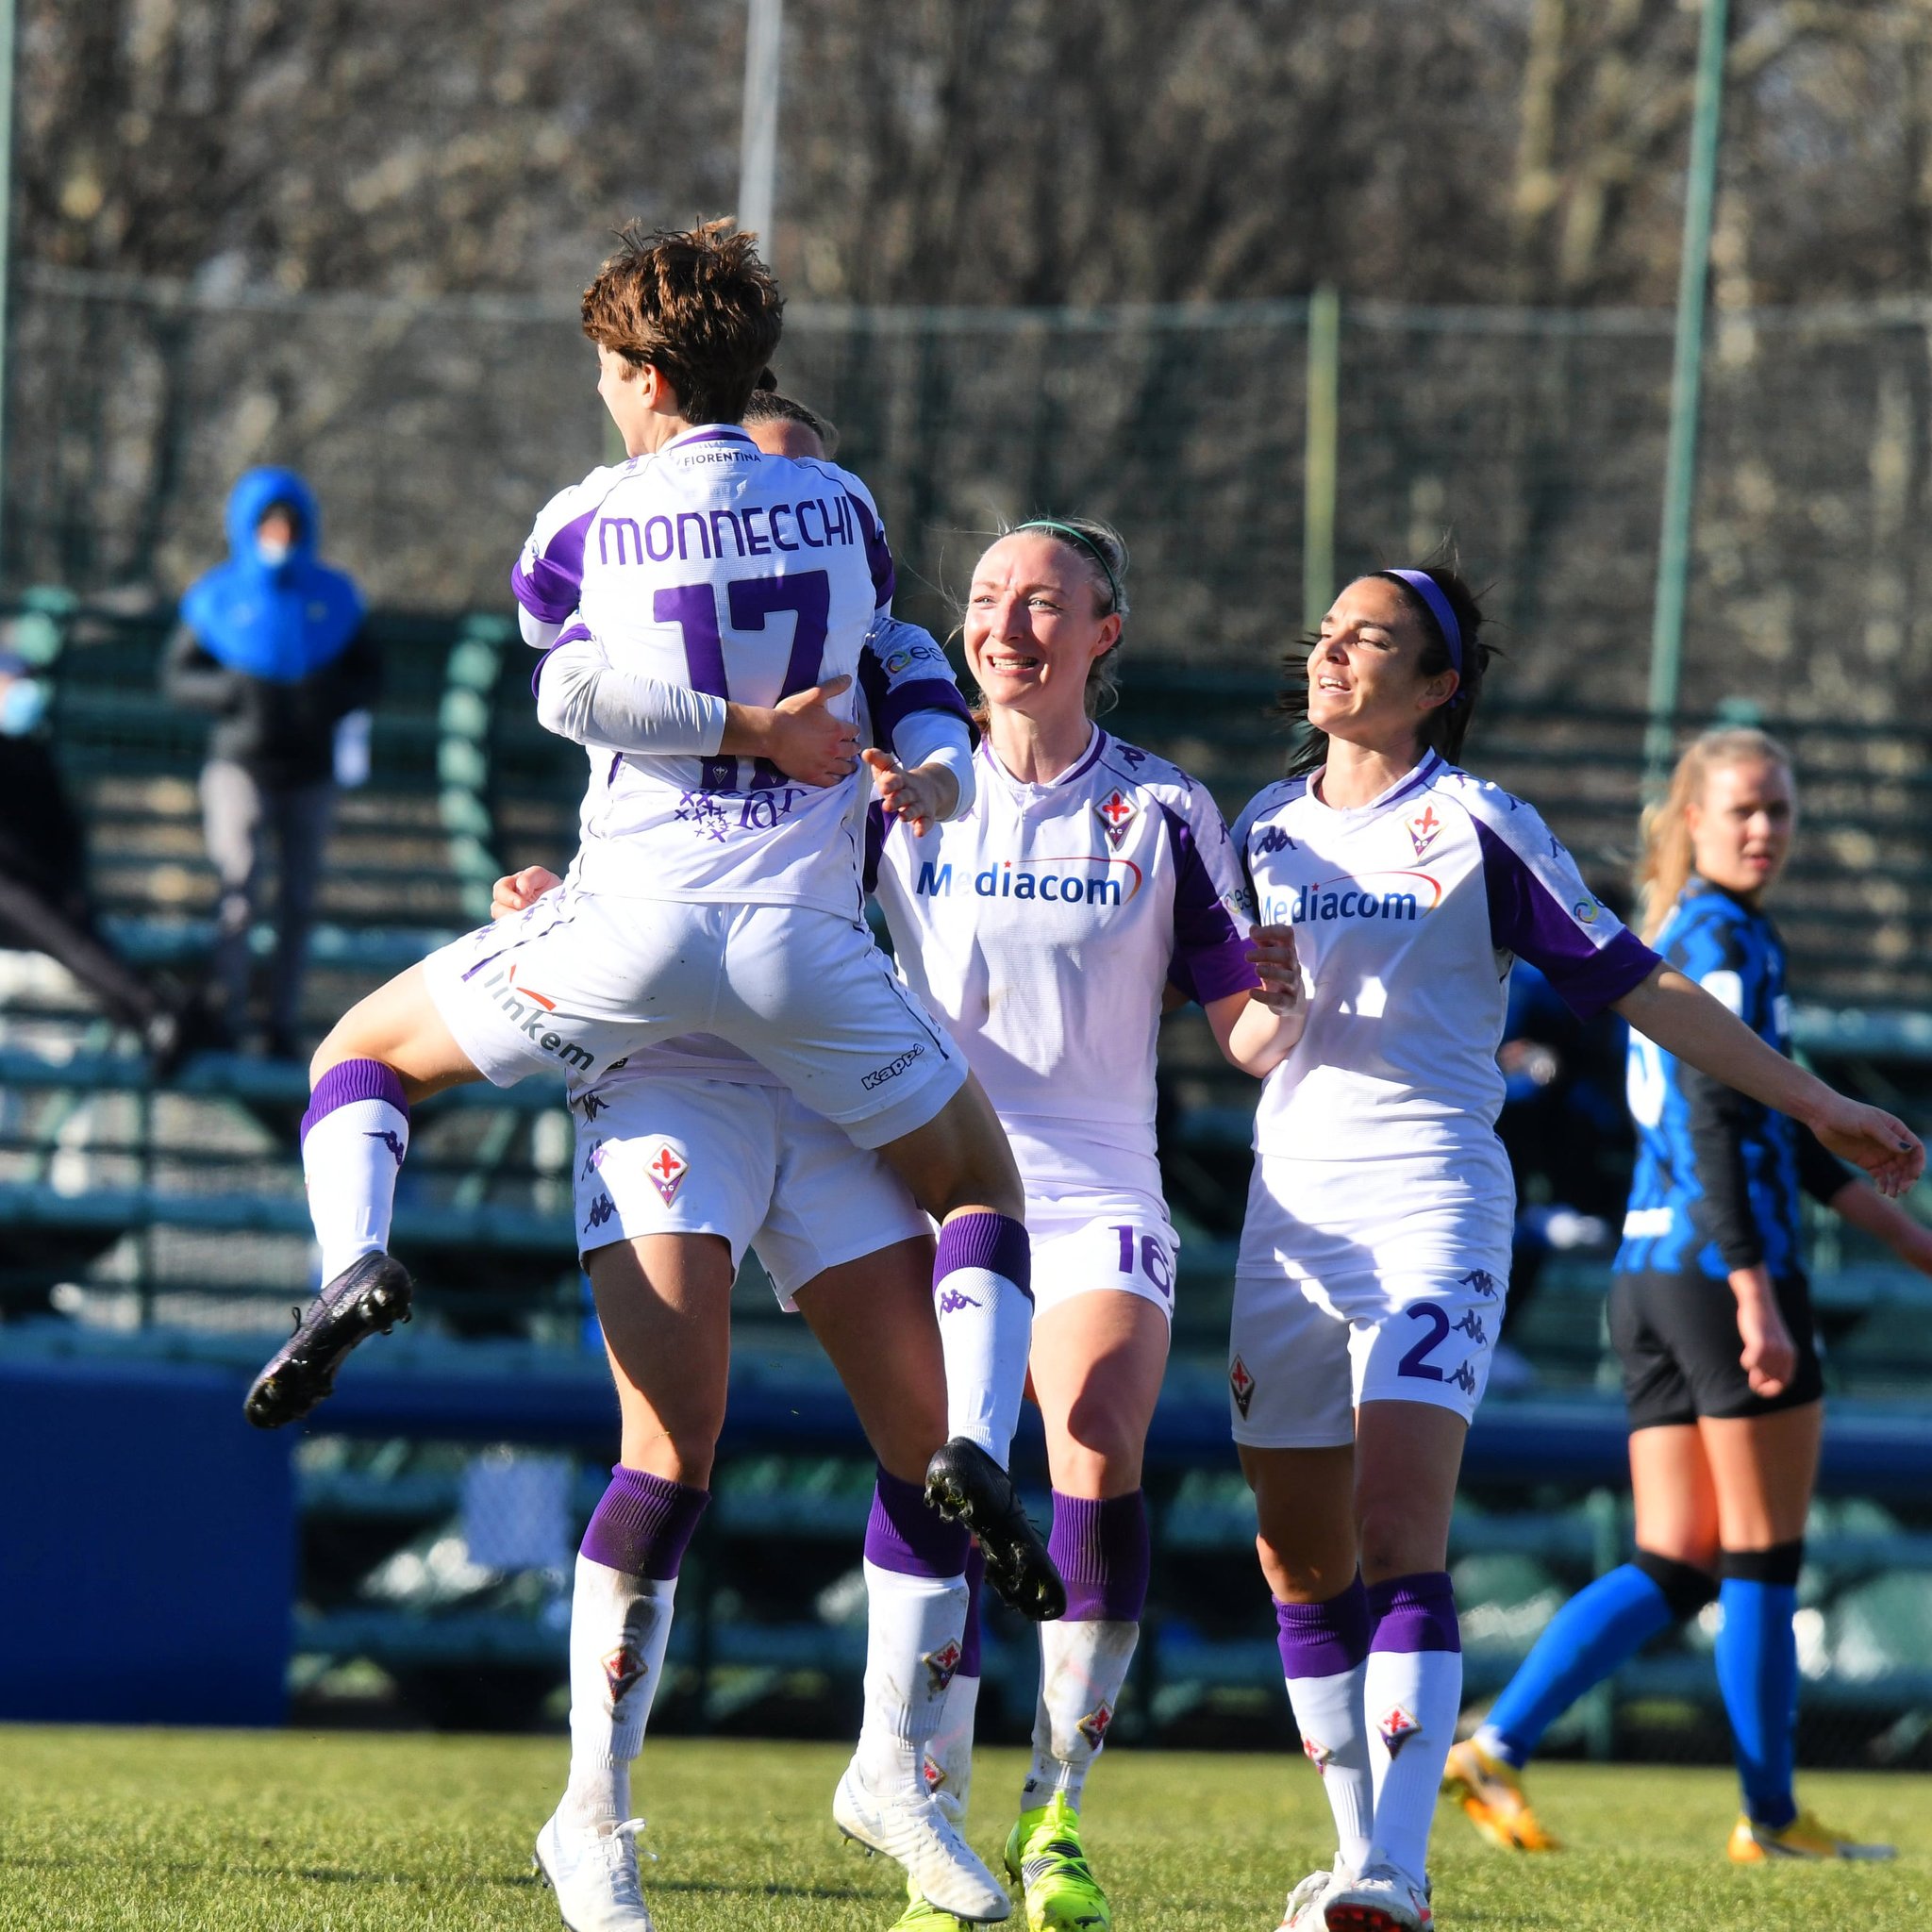 Louise Quinn on X: The big cheesy grin on my face says it all 😁 +3 points  #ForzaViola ⚜️  / X